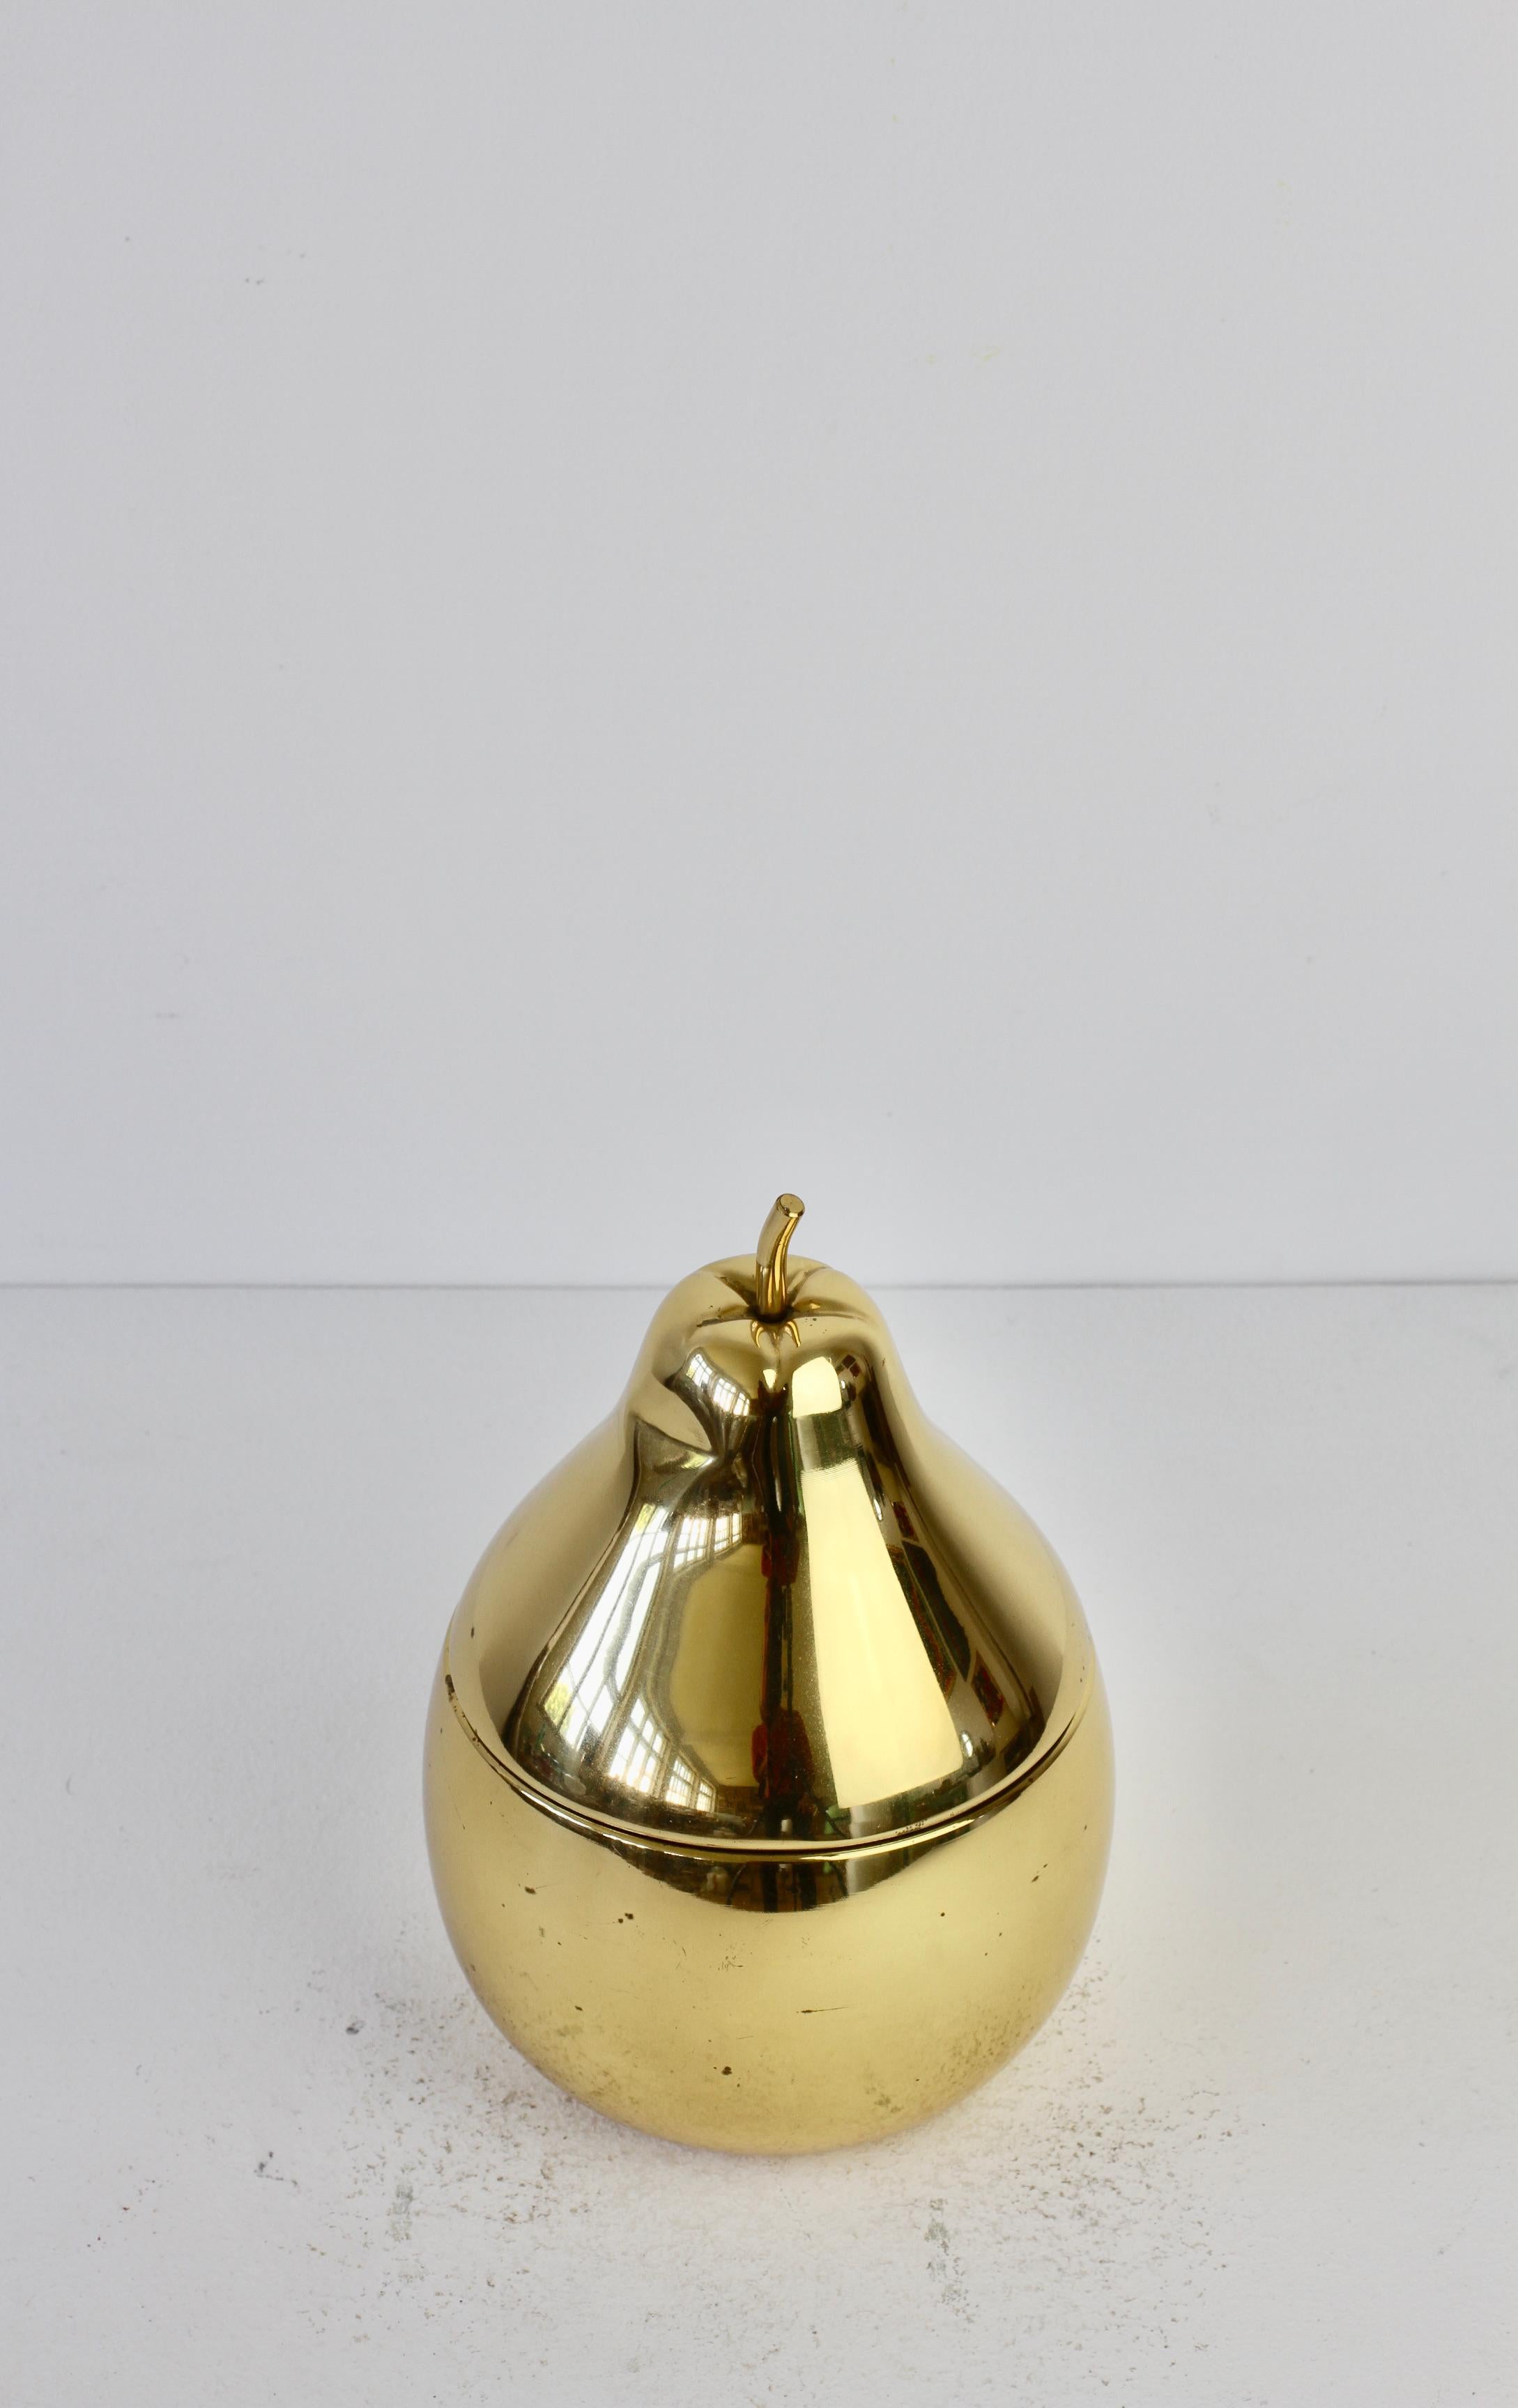 Ettore Sottsass Style Vintage Pear Shaped Brass Ice Cube Bucket or Holder, 1970s For Sale 1